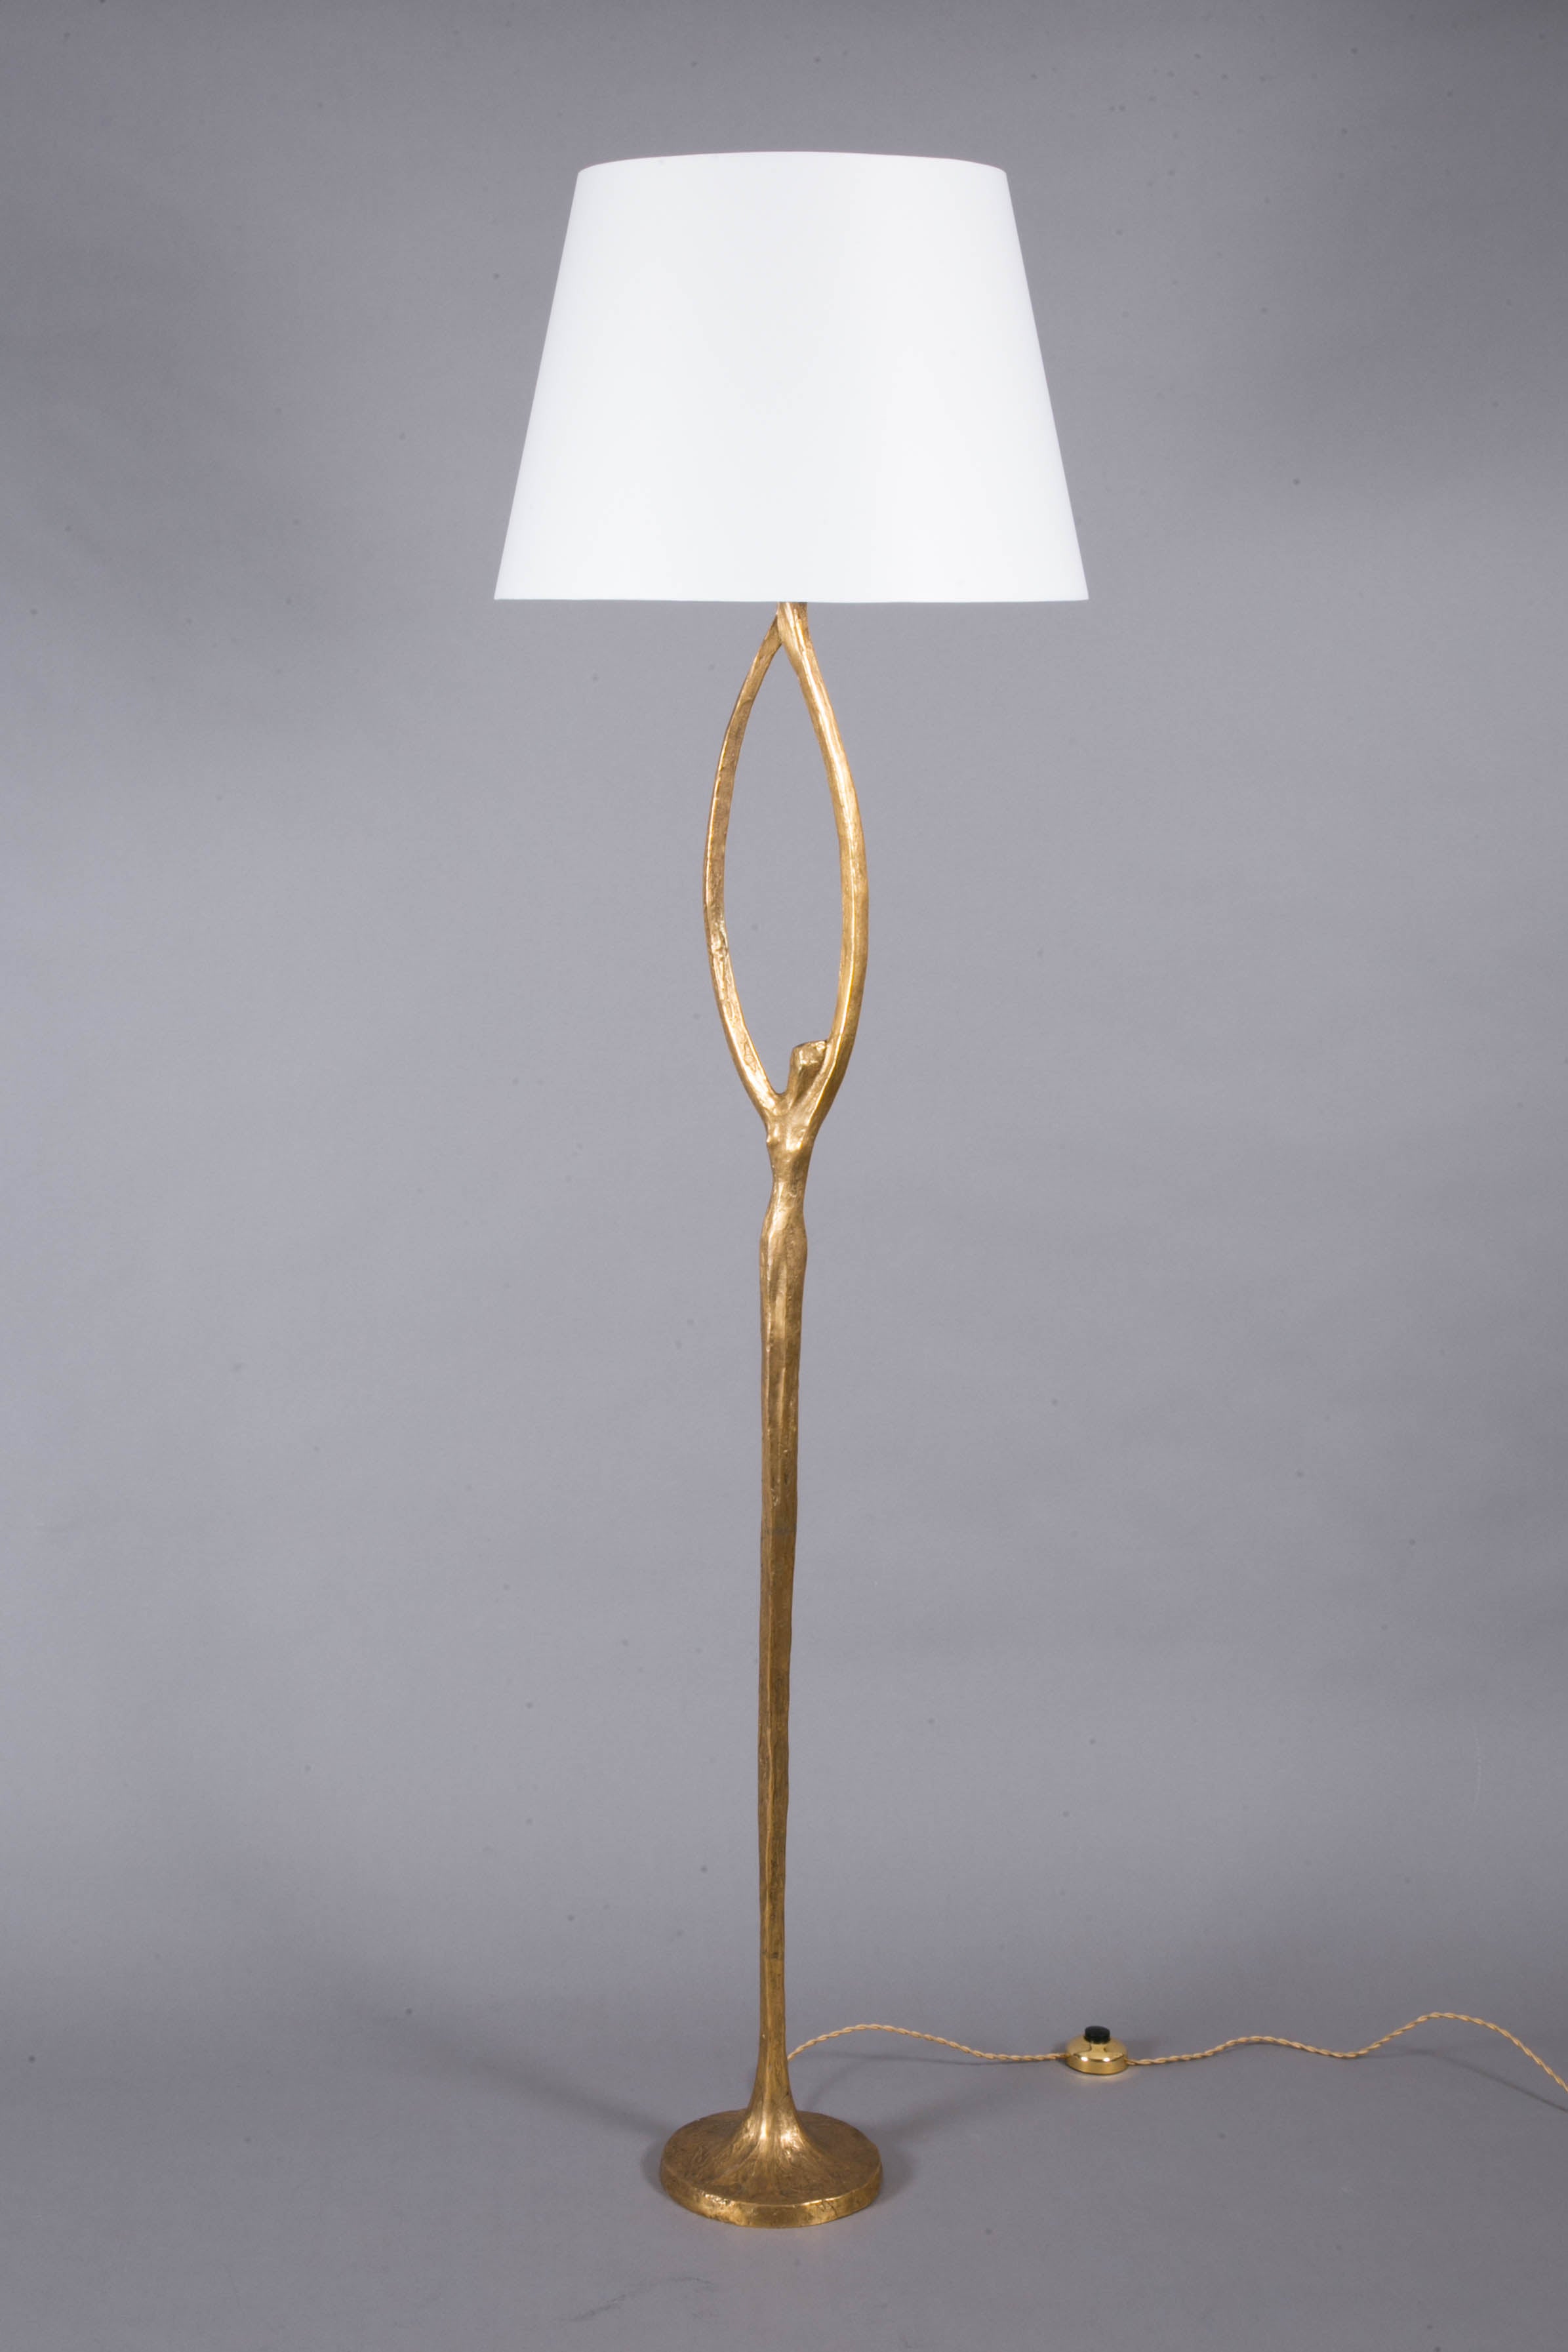 Rare gilt patinated sculpted bronze floor lamp called “Standing woman“, with lampshade, circa 1960 by Felix Agostini (1910-1980).
Circular base. Bronze shaft ht 145 cm.

Ref : Maison française Revue, 1956.